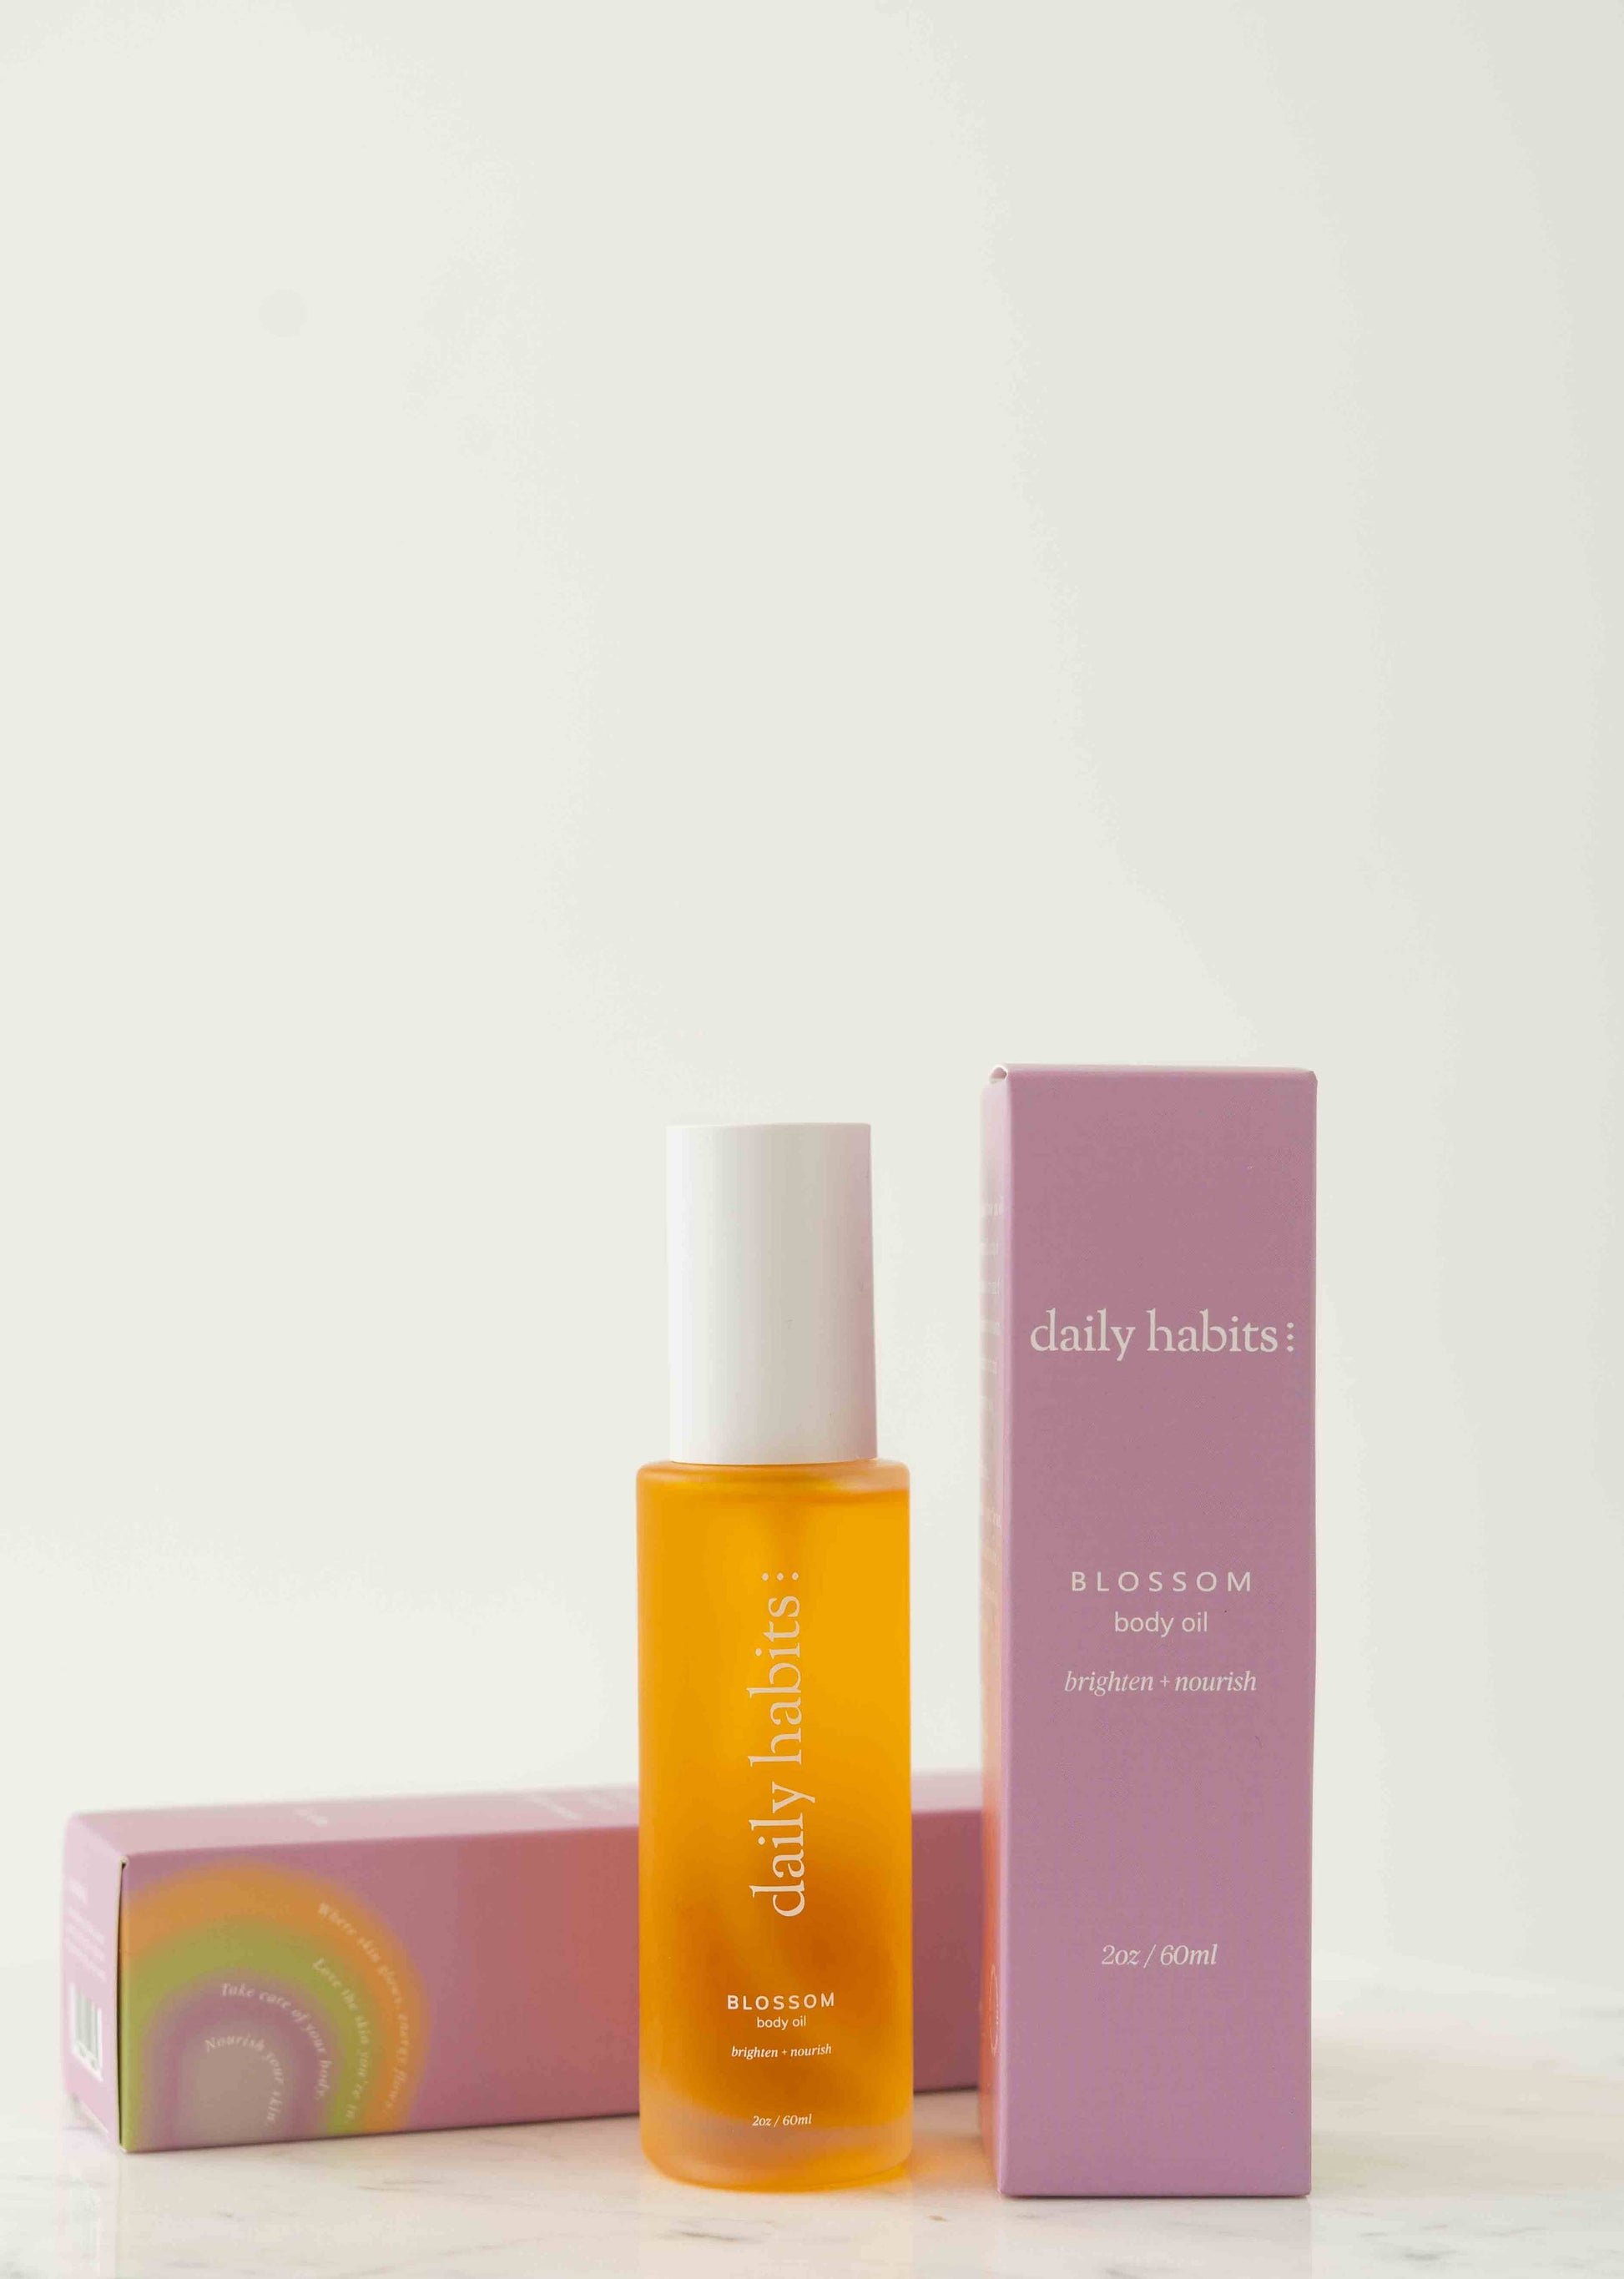 Organic Blossom Body Oil in elegant packaging, featuring Daily Habits’ nourishing formula.